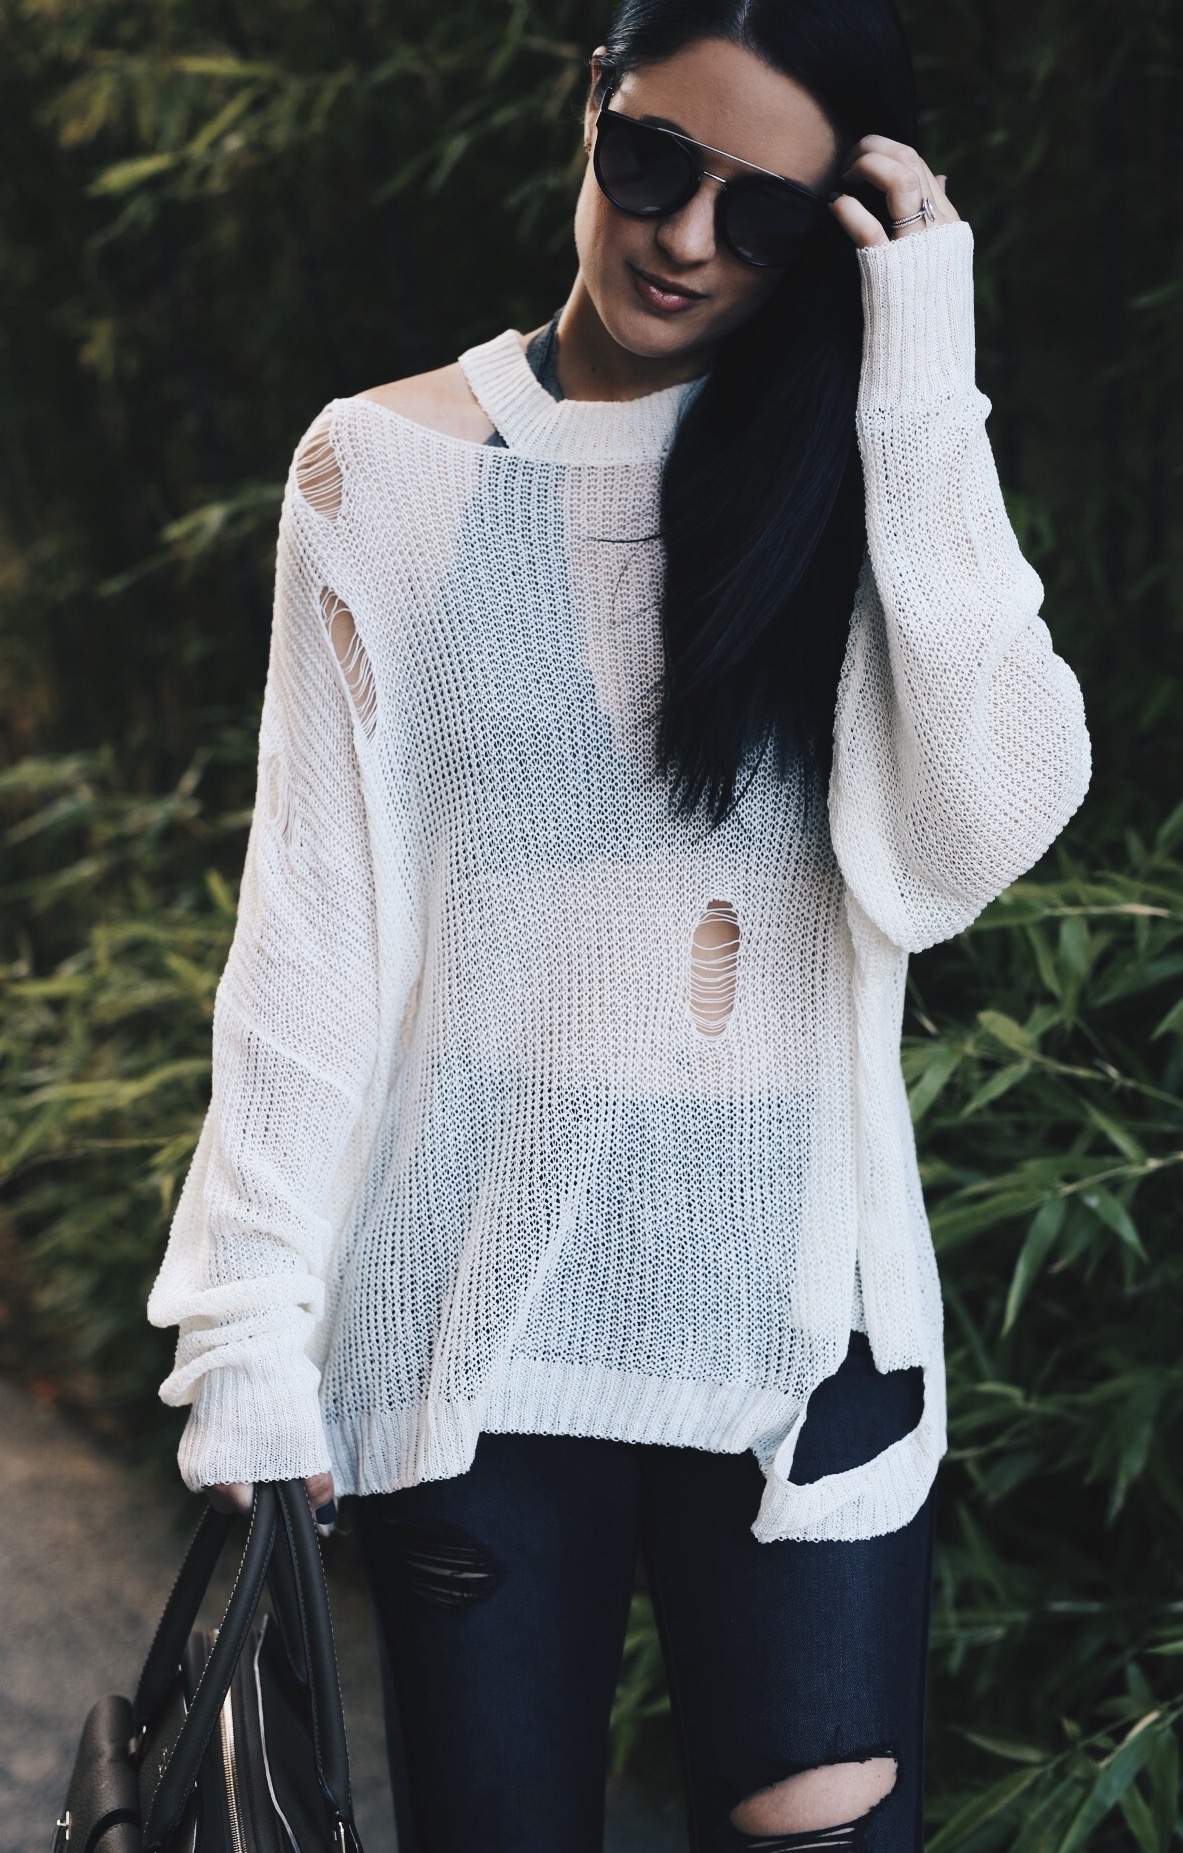 Tips on How to Wear a Sheer Sweater in Cold Weather - Dressed to Kill